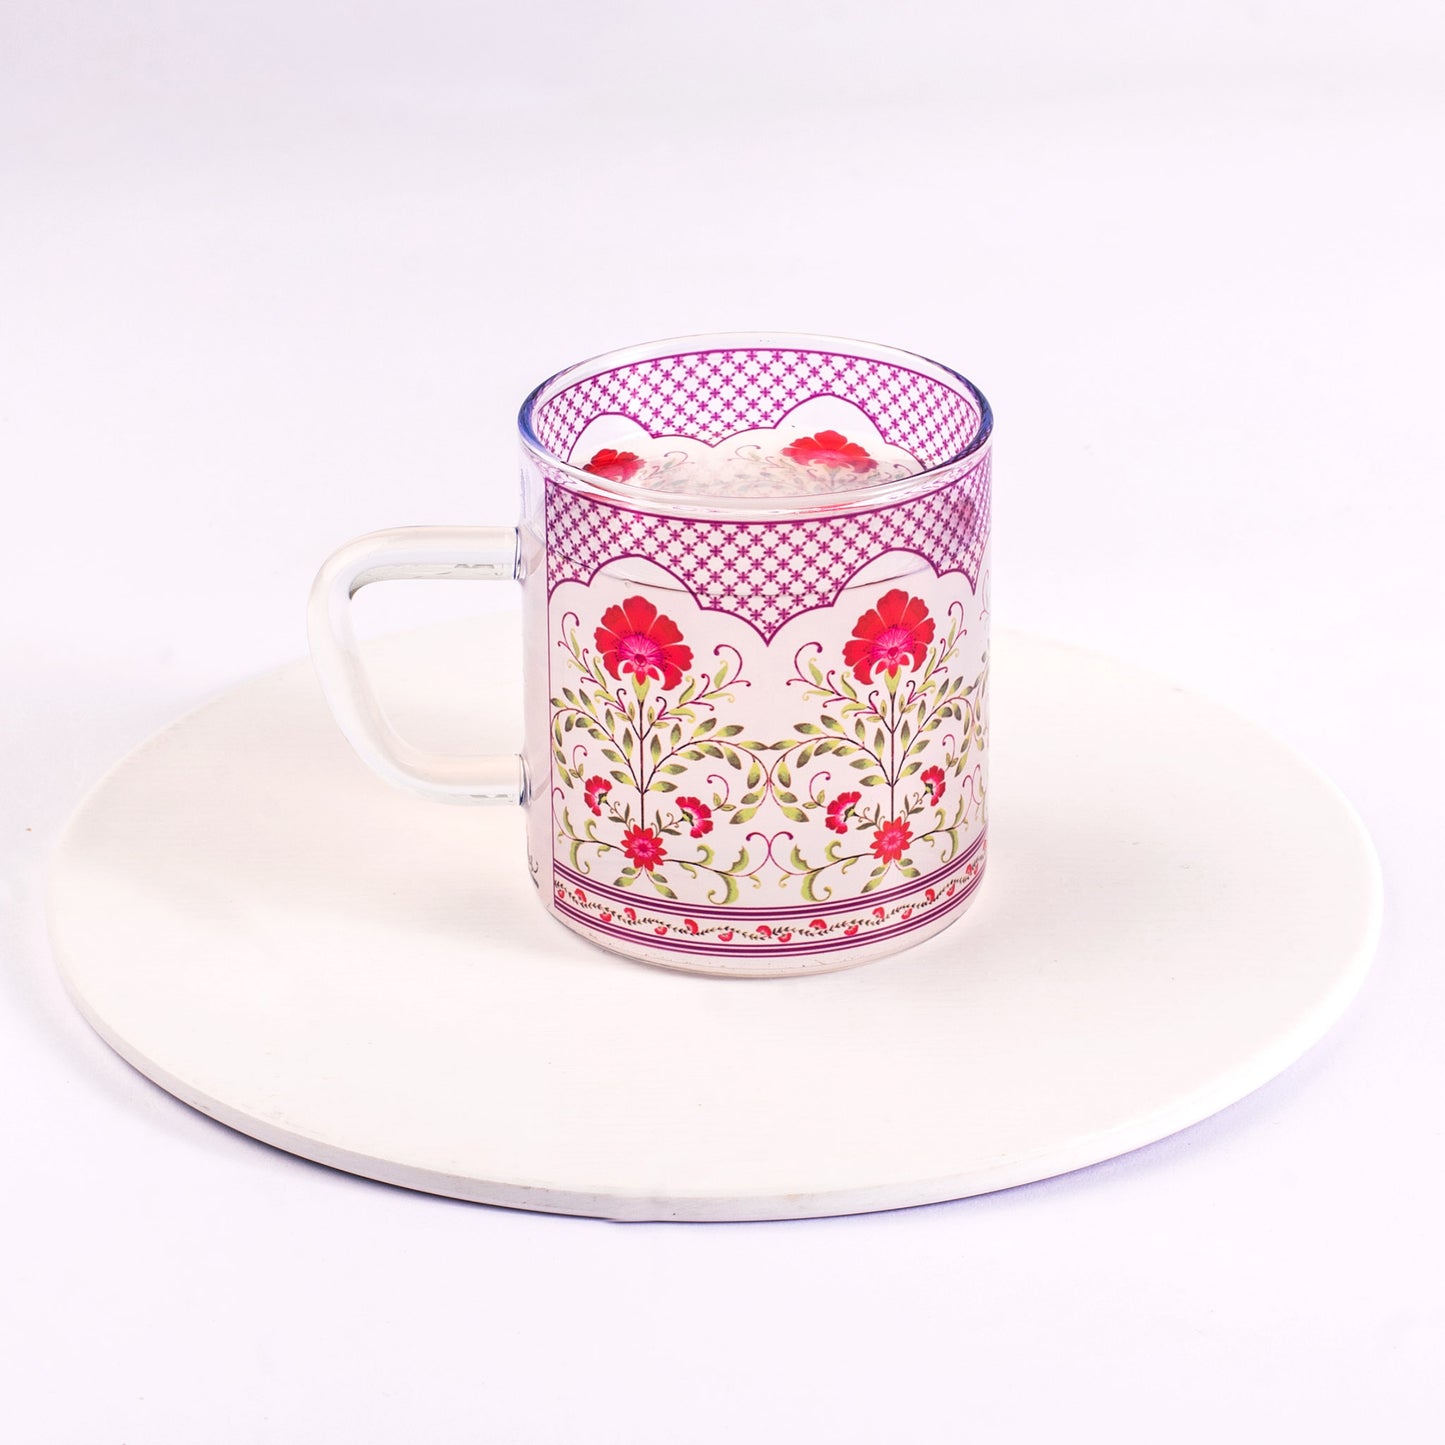 Floral Jali Print Tea cups - Set of 4 and 6